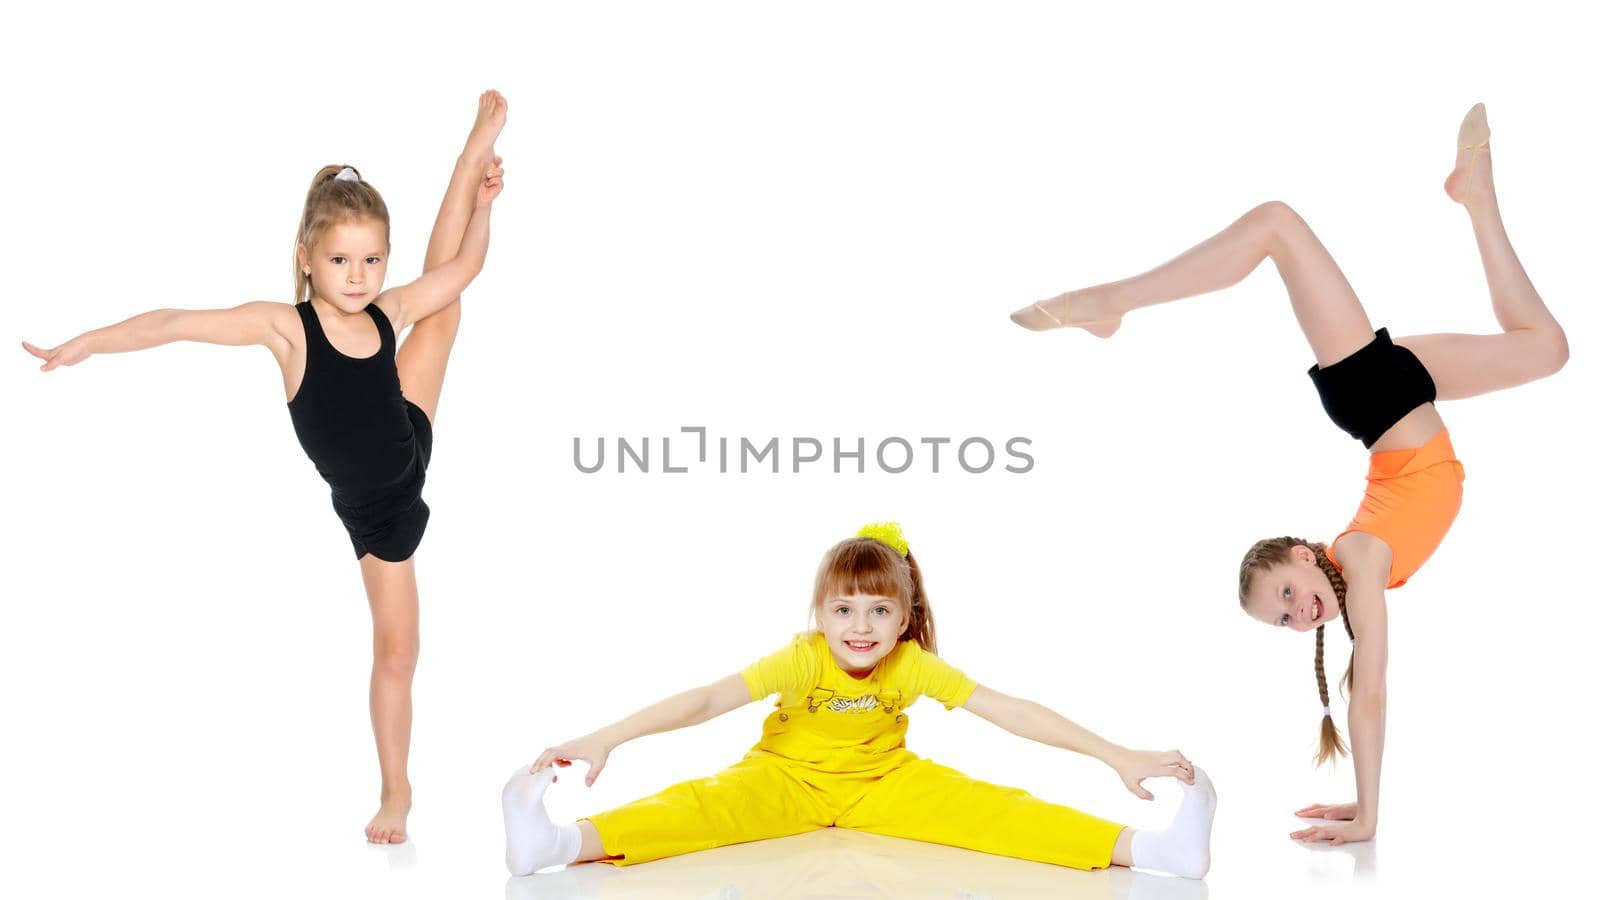 A group of cheerful little girls-gymnasts performing various gymnastic and fitness exercises. The concept of an active way of life, a happy childhood. Isolated on white background.